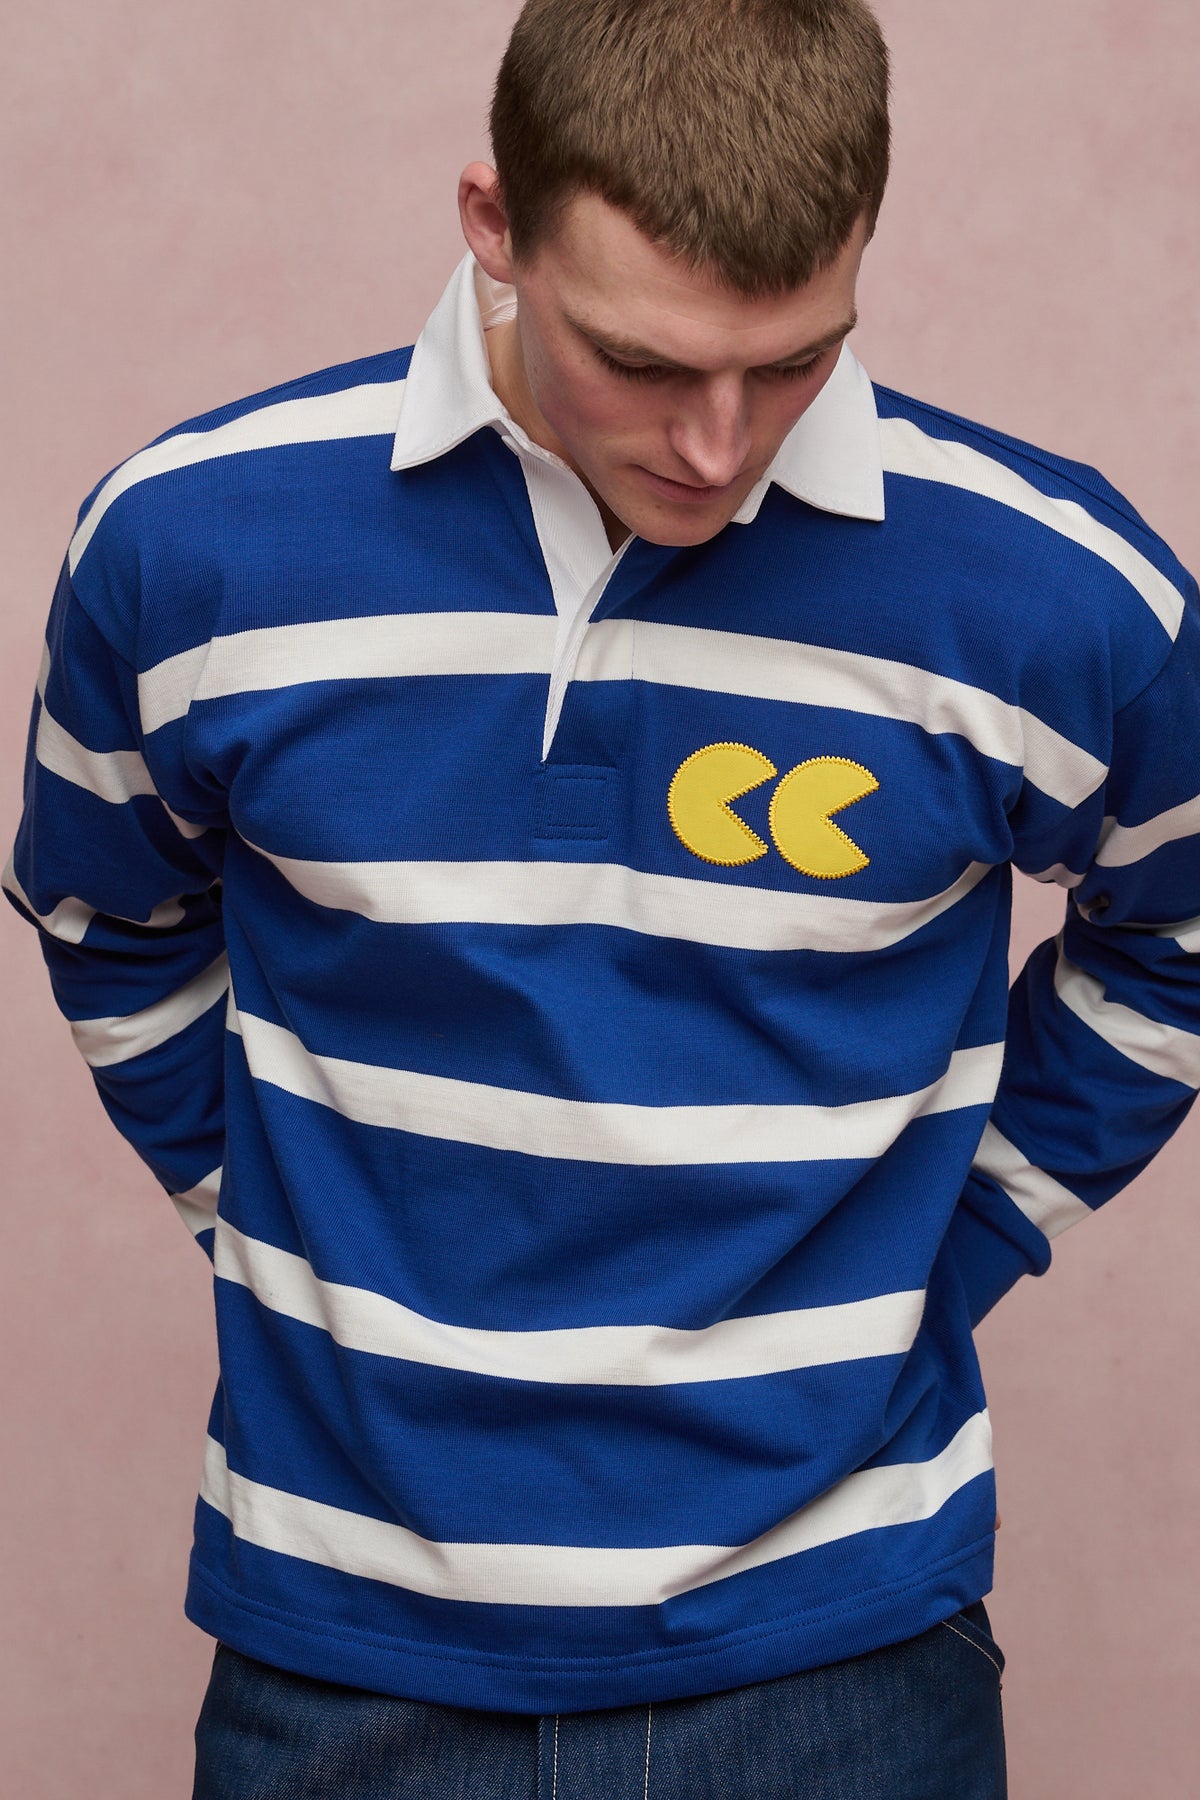 
            Thigh up image of male with shaved brown hair wearing stripe logo rugby shirt in blue white stripe with yellow CC logo applique patch on chest